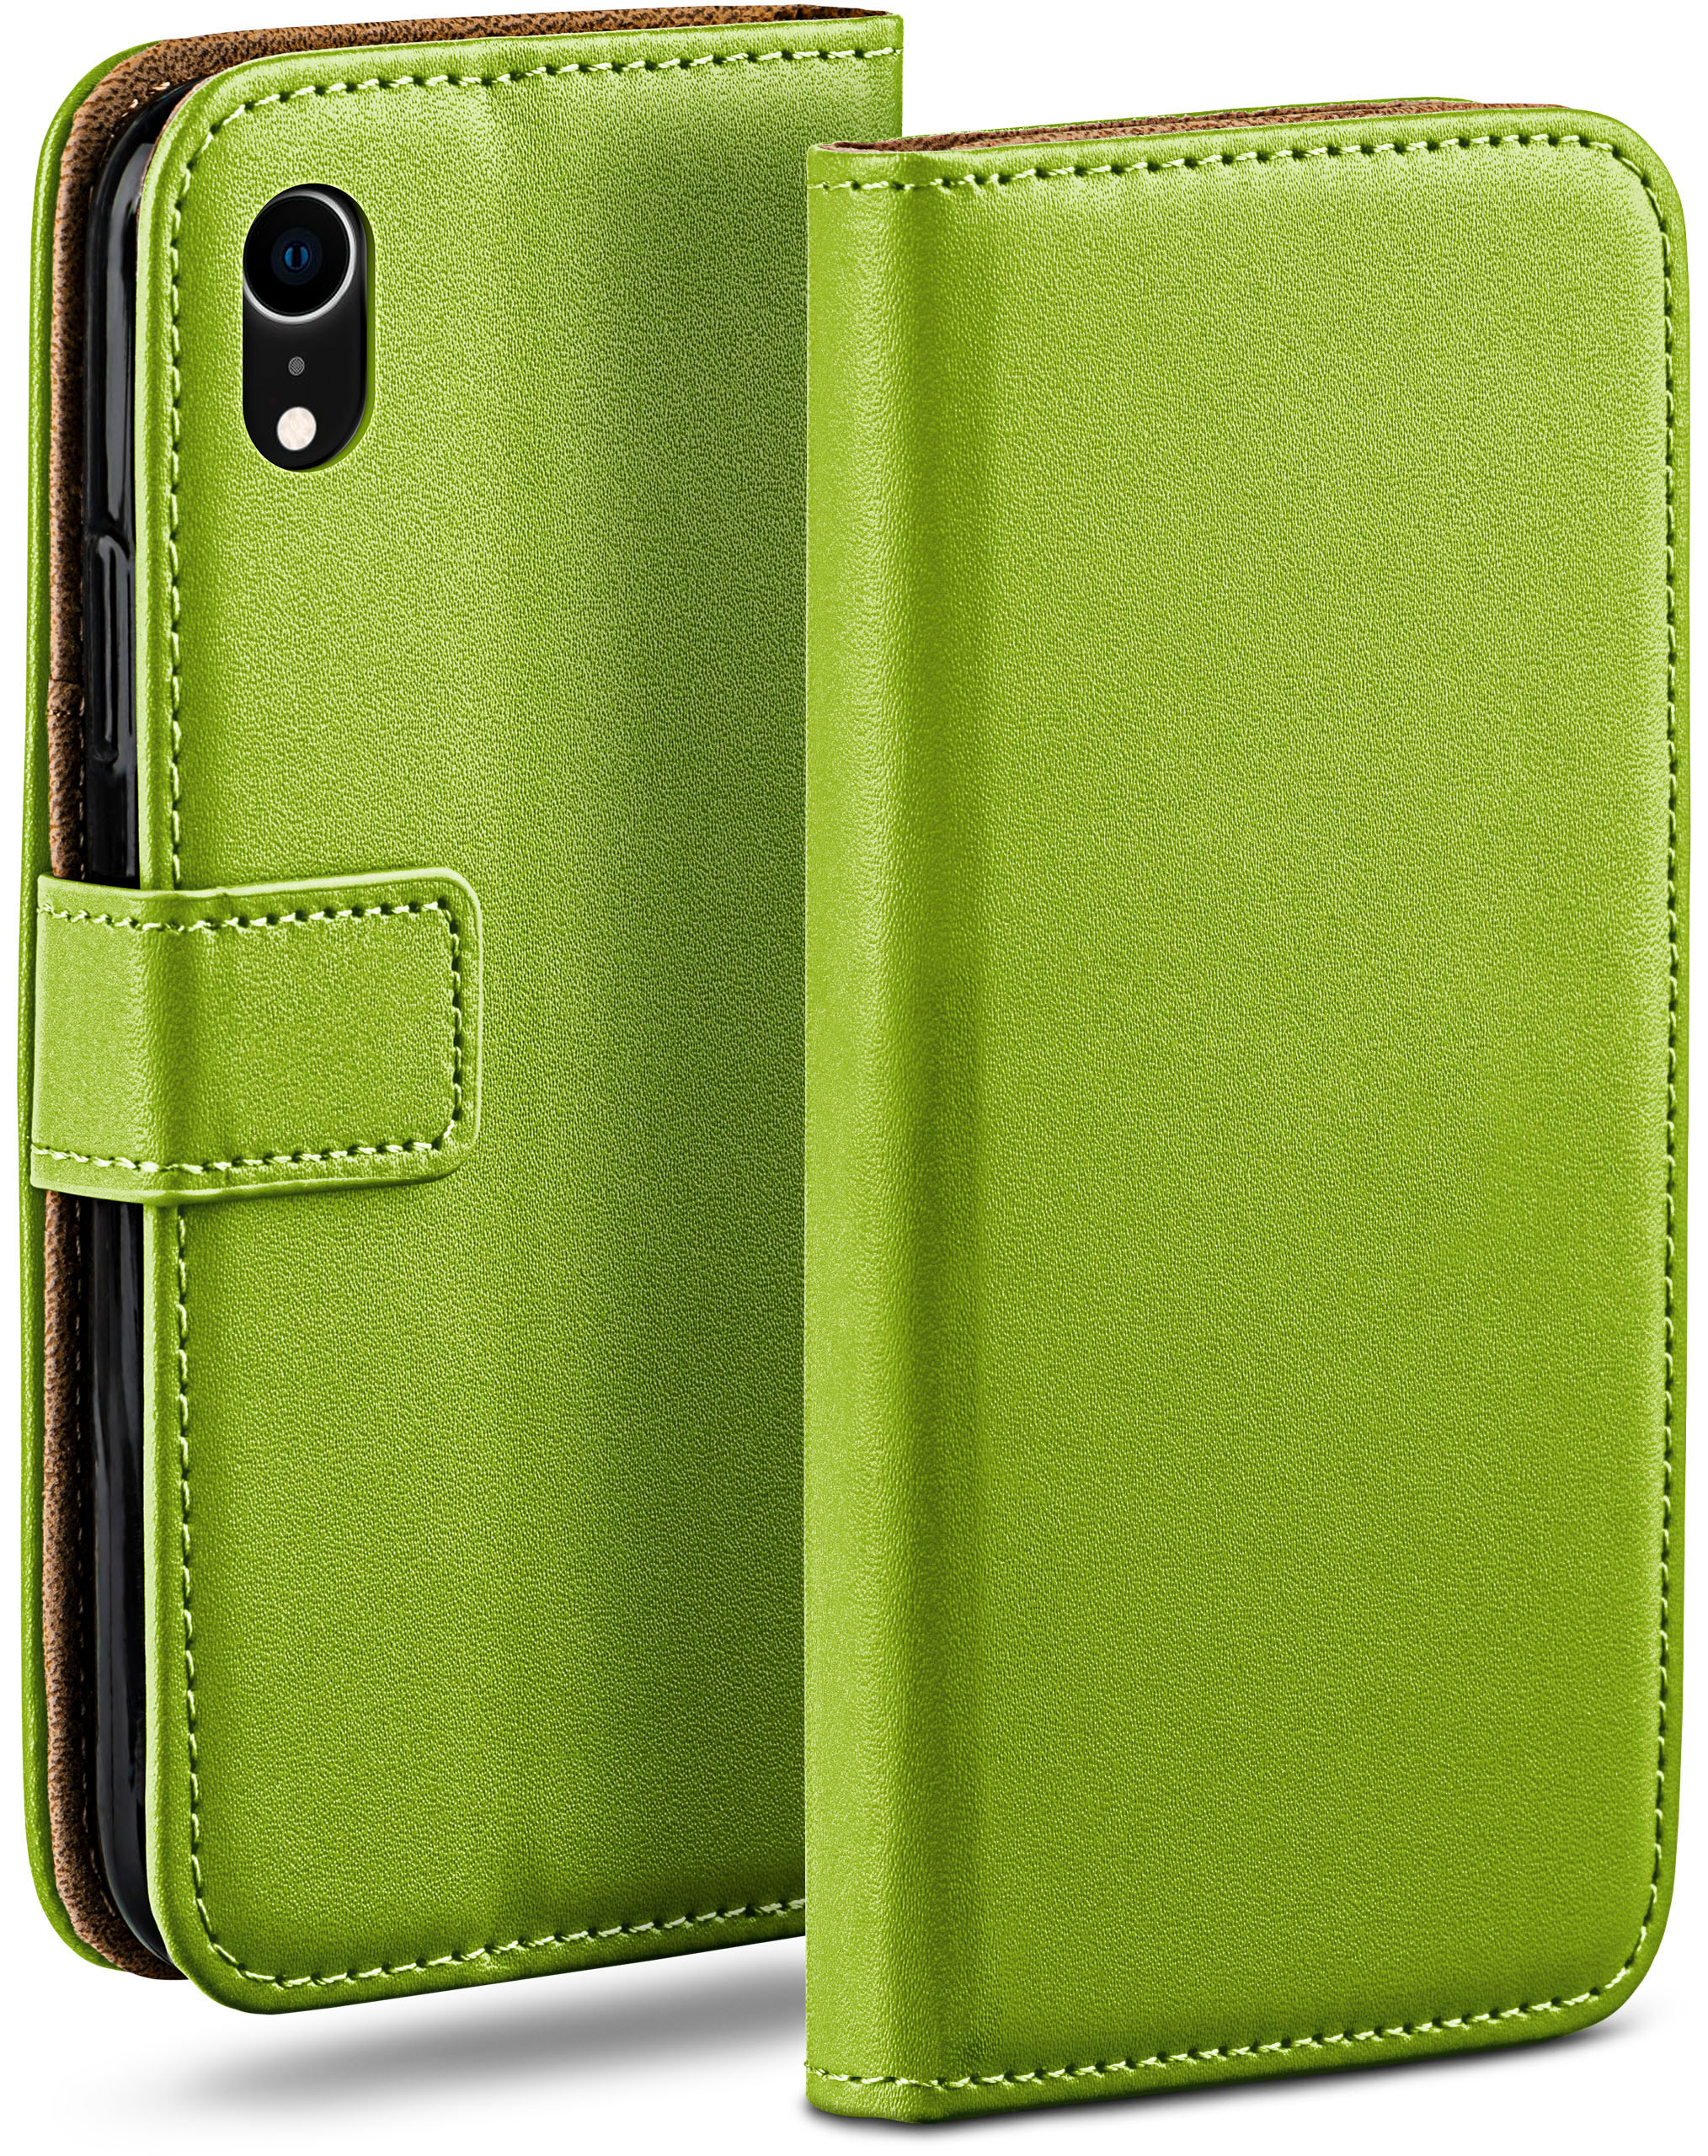 iPhone Book XR, Lime-Green Apple, Case, Bookcover, MOEX